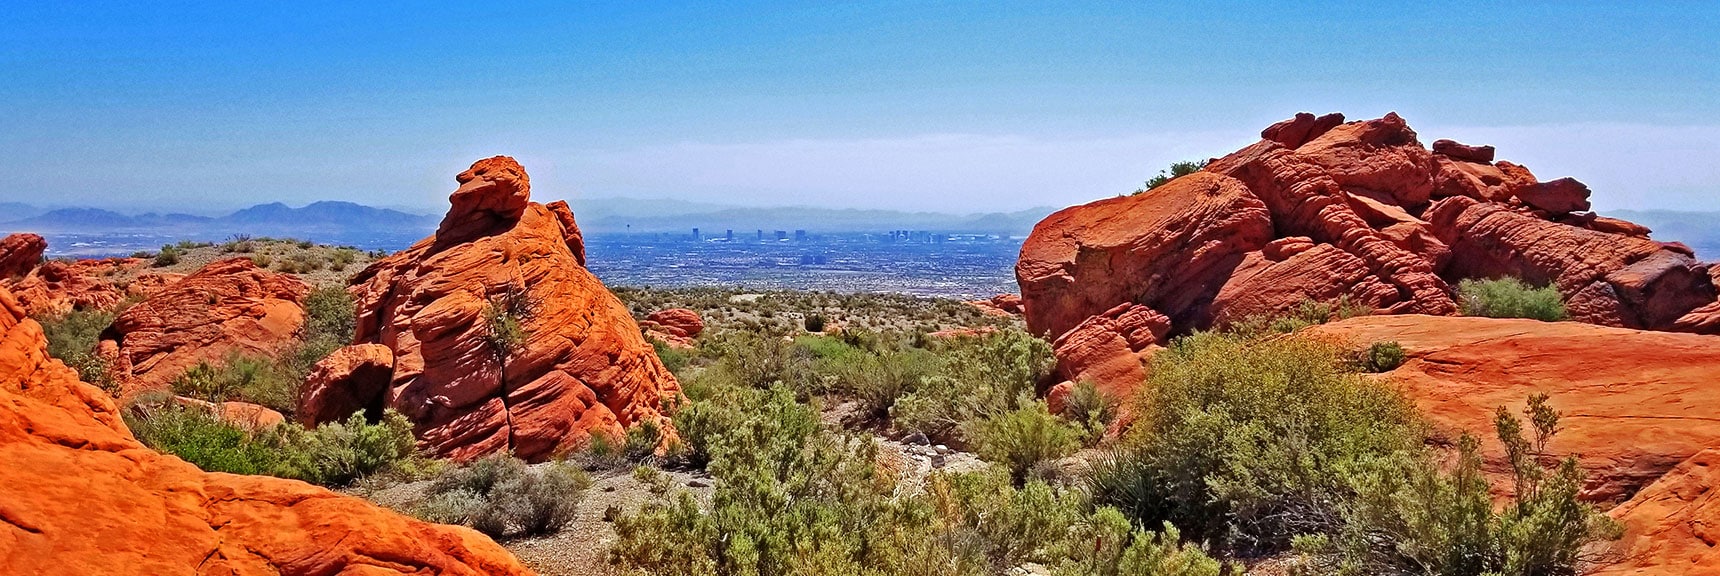 Another View Toward Frenchman Mt and Las Vegas Strip | Little Red Rock Las Vegas, Nevada, Near La Madre Mountains Wilderness